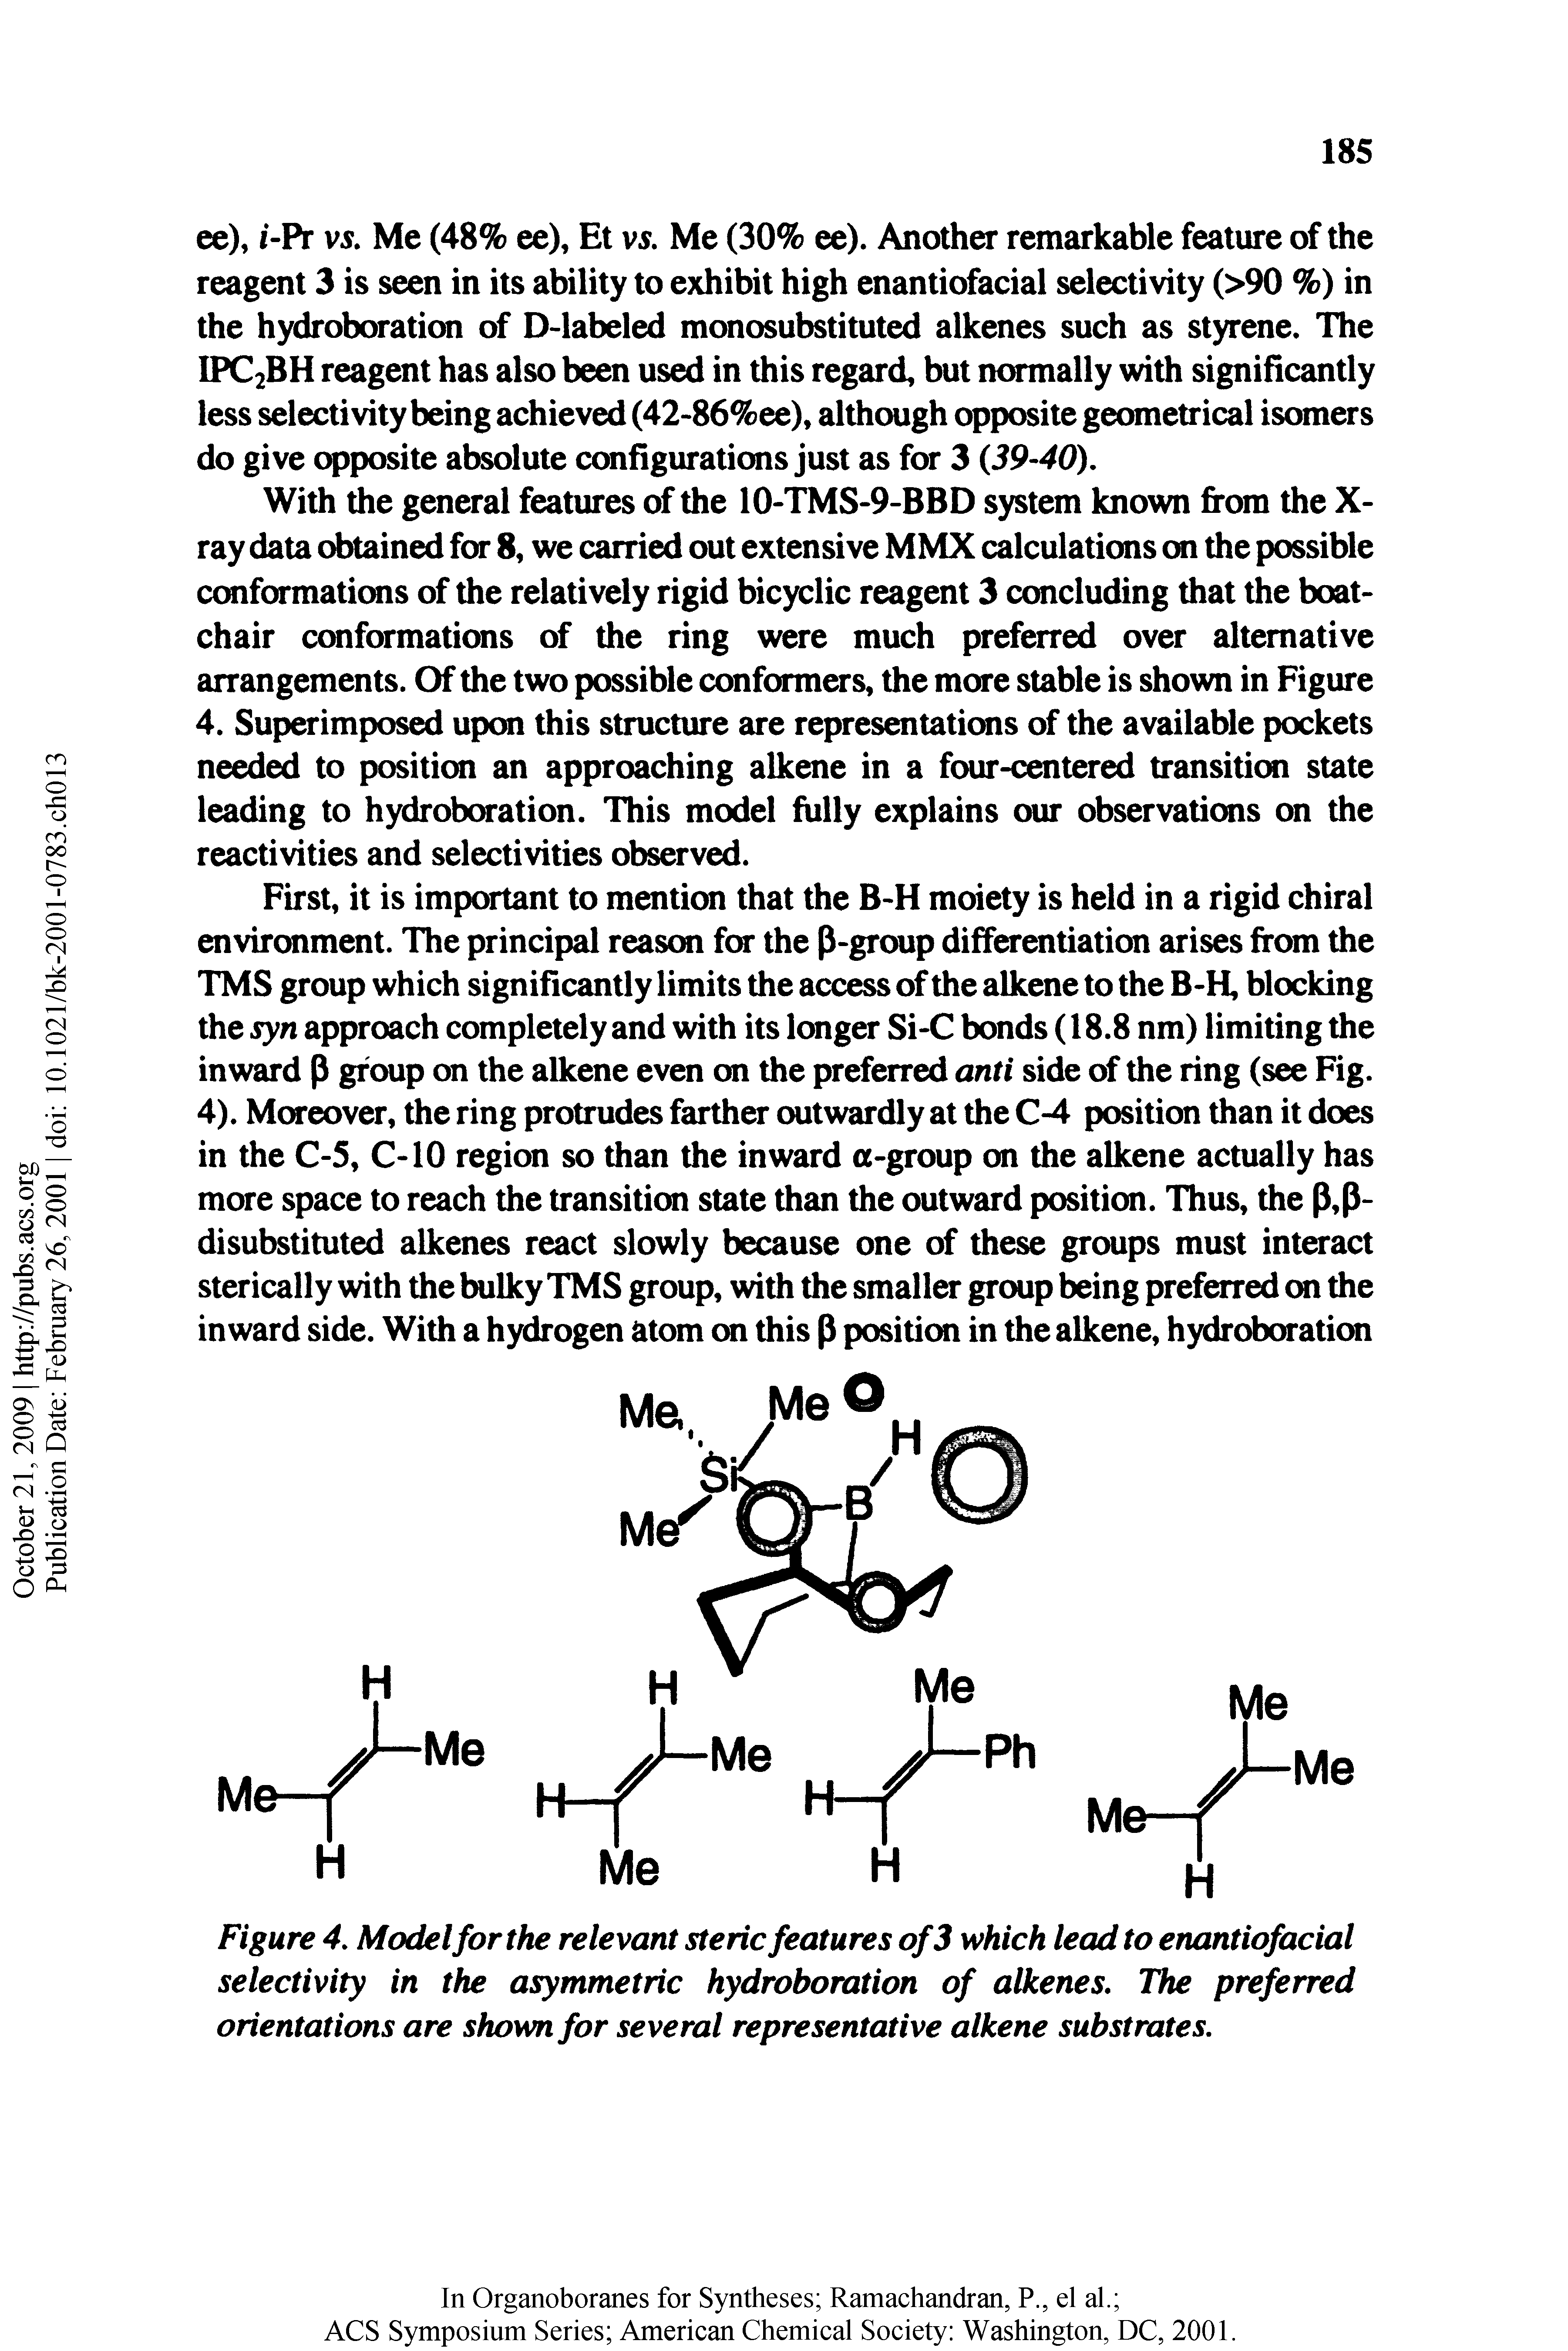 Figure 4, Model for the relevant steric features of3 which lead to enantiofacial selectivity in the asymmetric hydroboration of alkenes. The preferred orientations are shown for several representative alkene substrates.